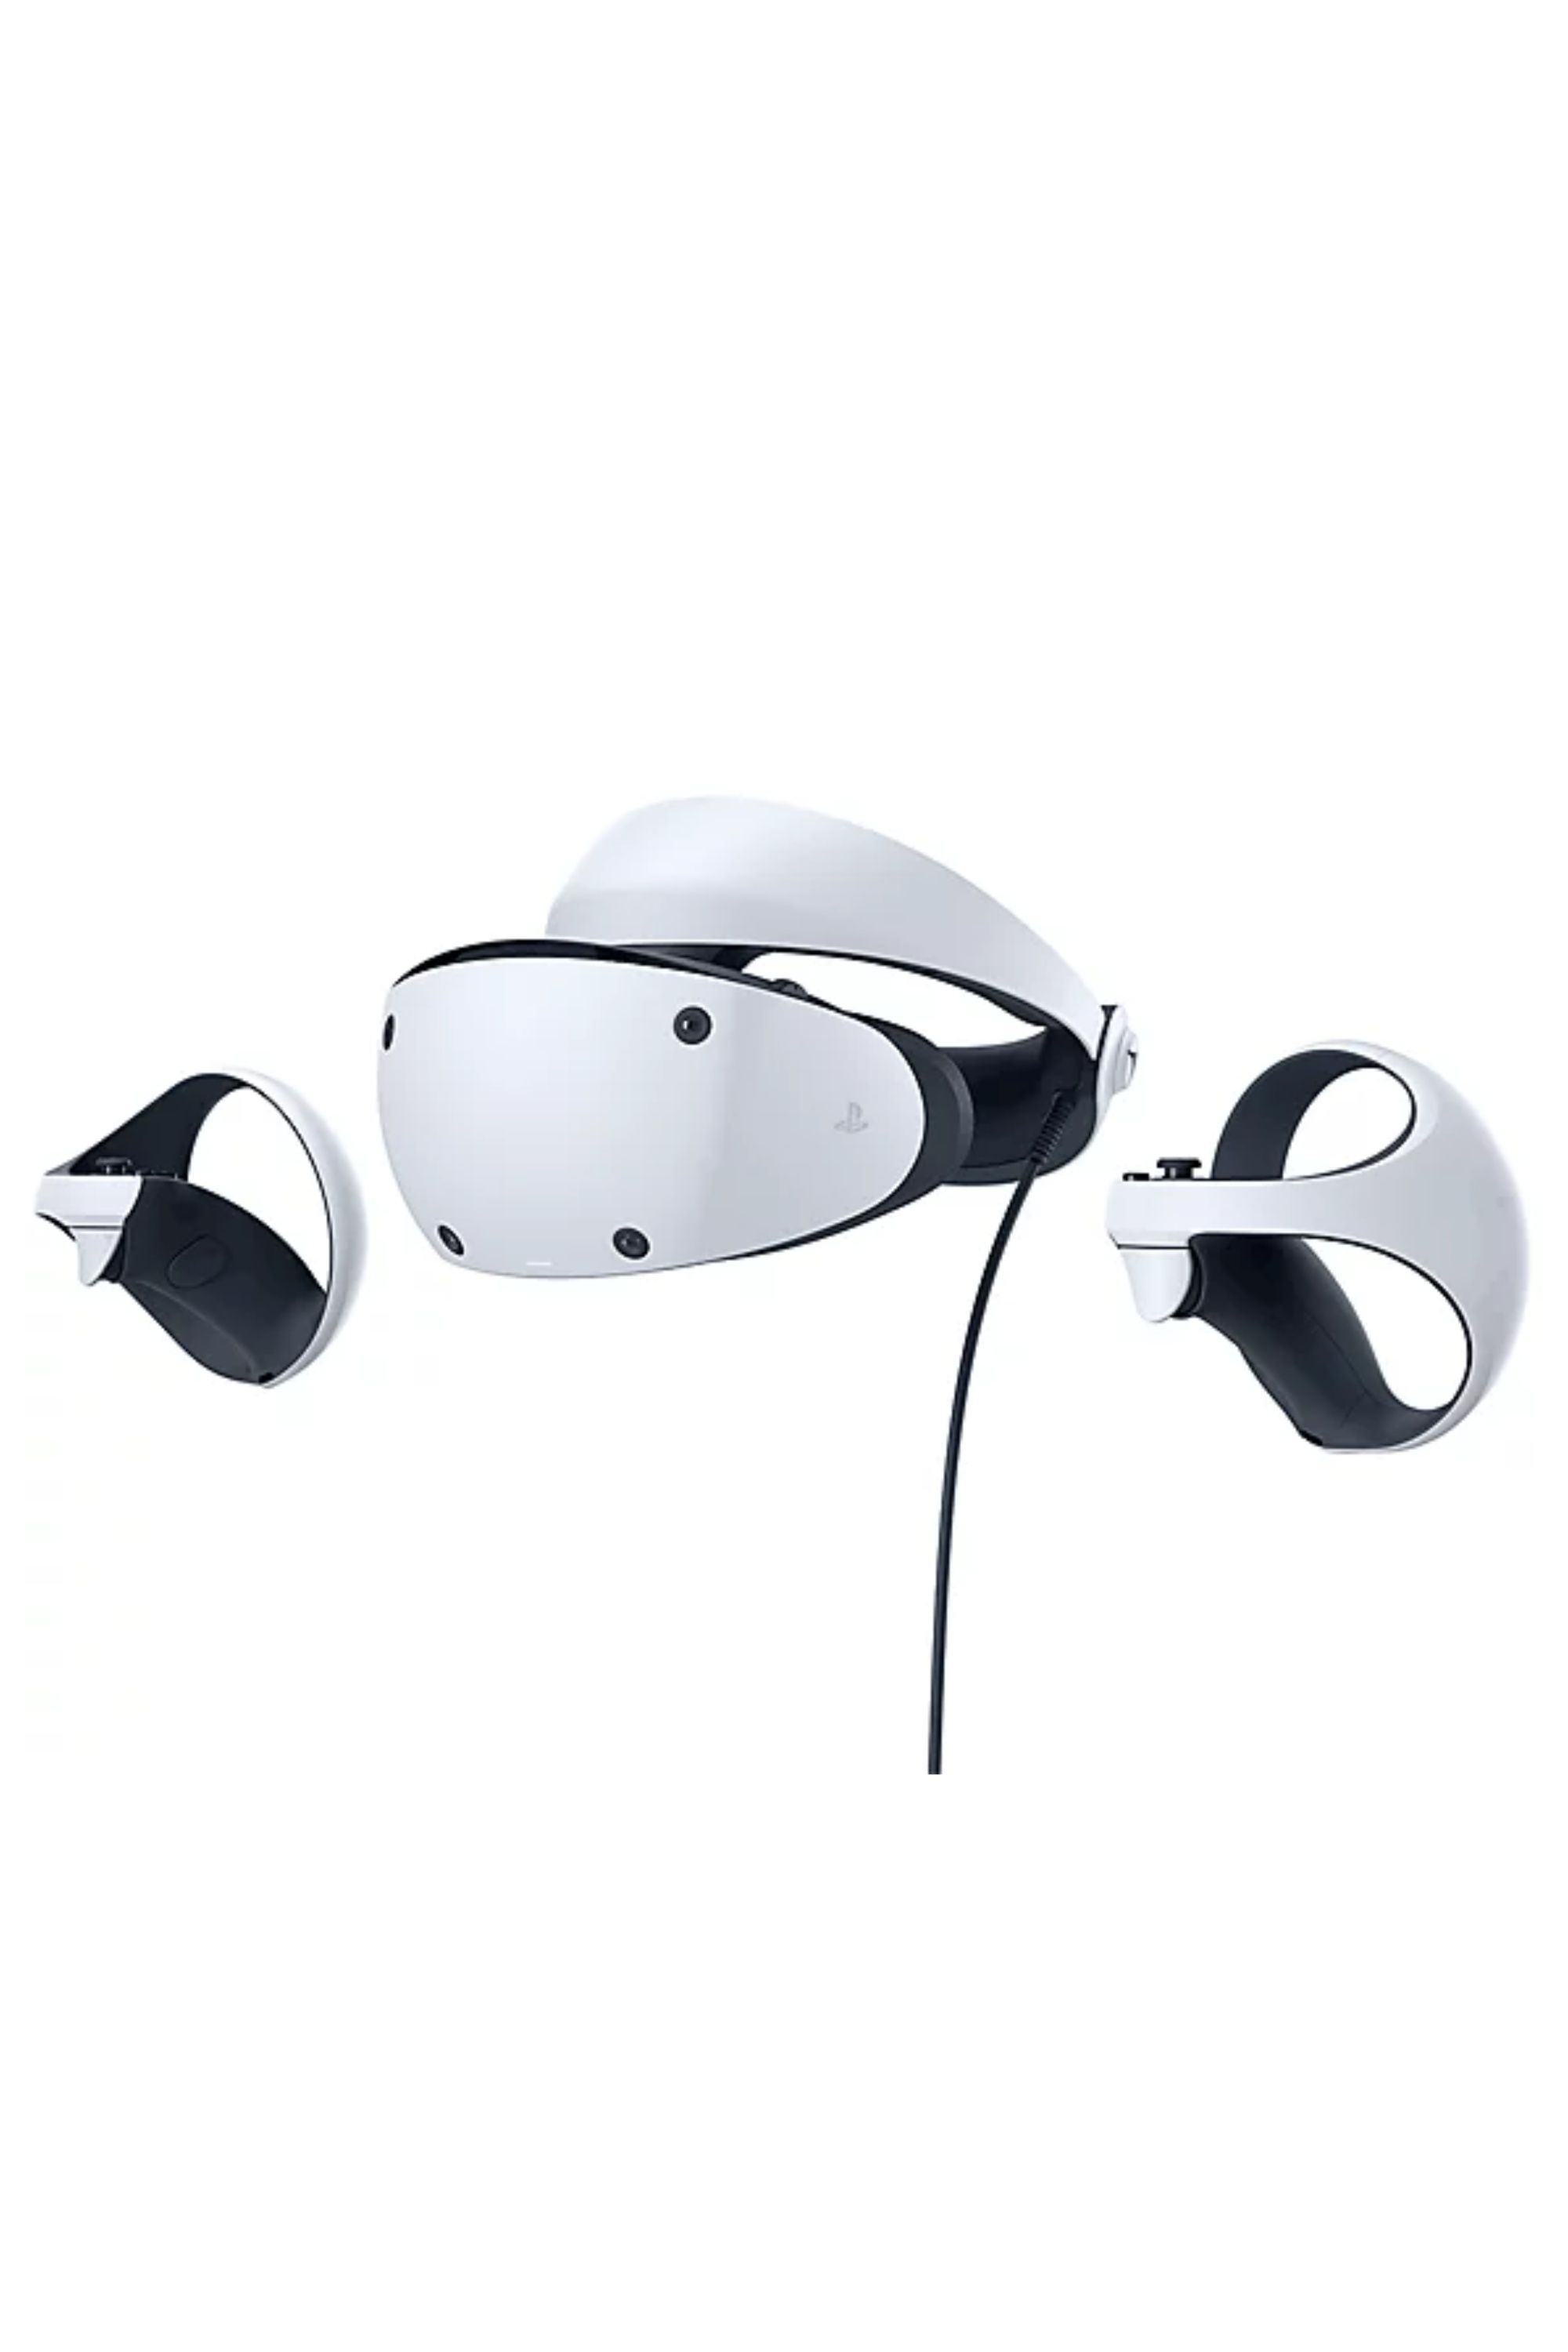 playstation vr2 headset and controllers